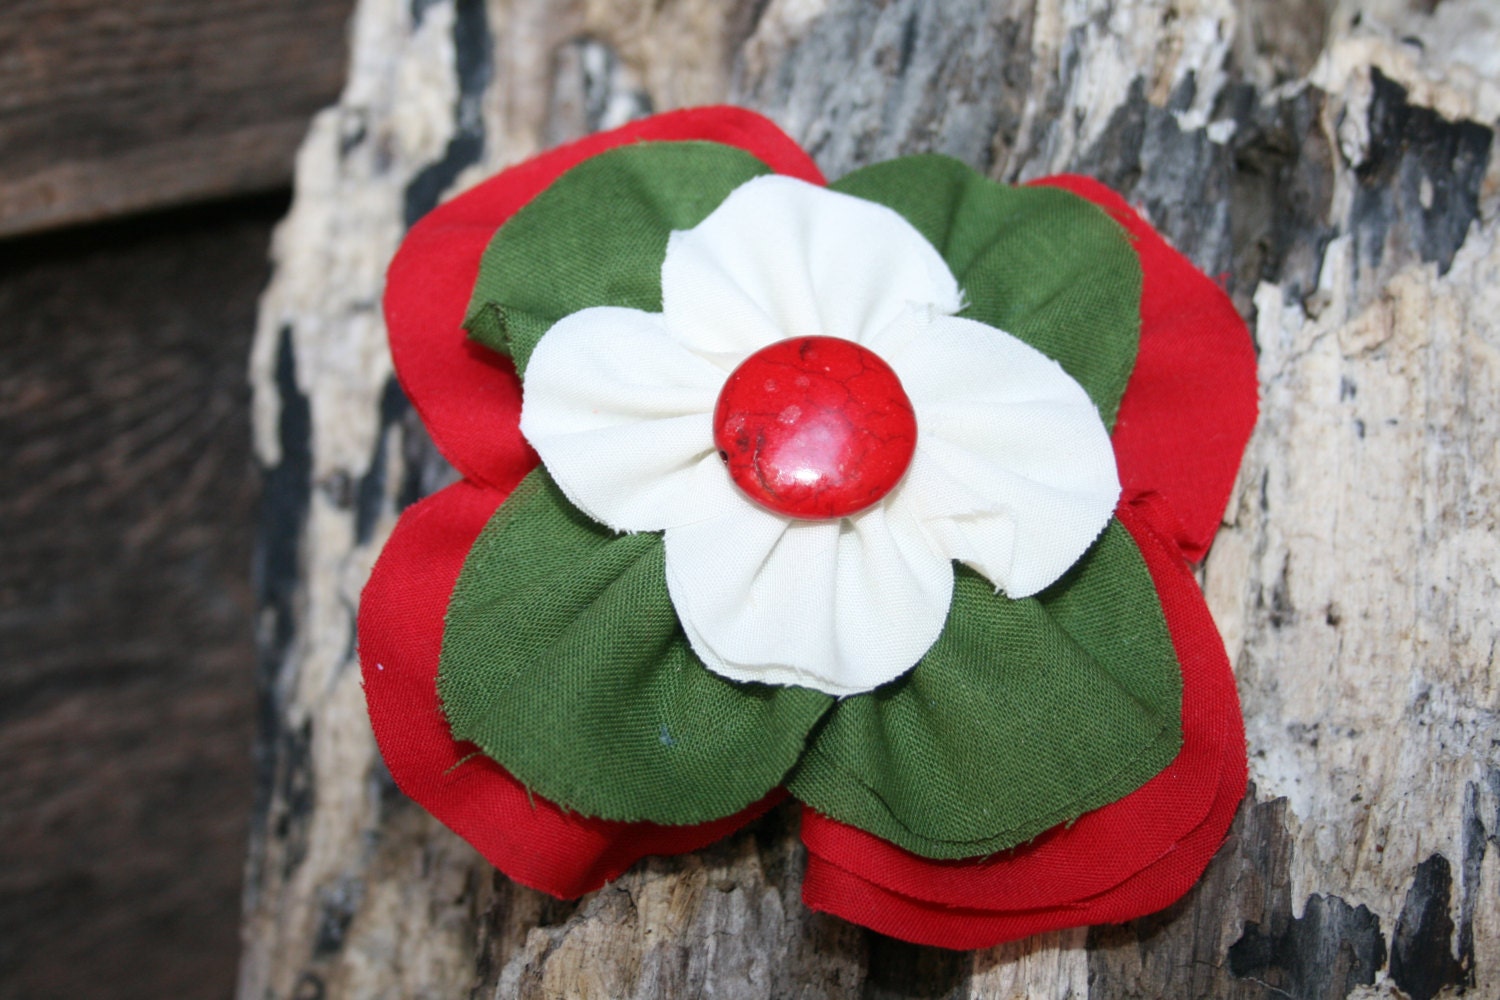 Handmade red, green and cream stacked flower with red button in the middle. - RockabillyBabyPlace